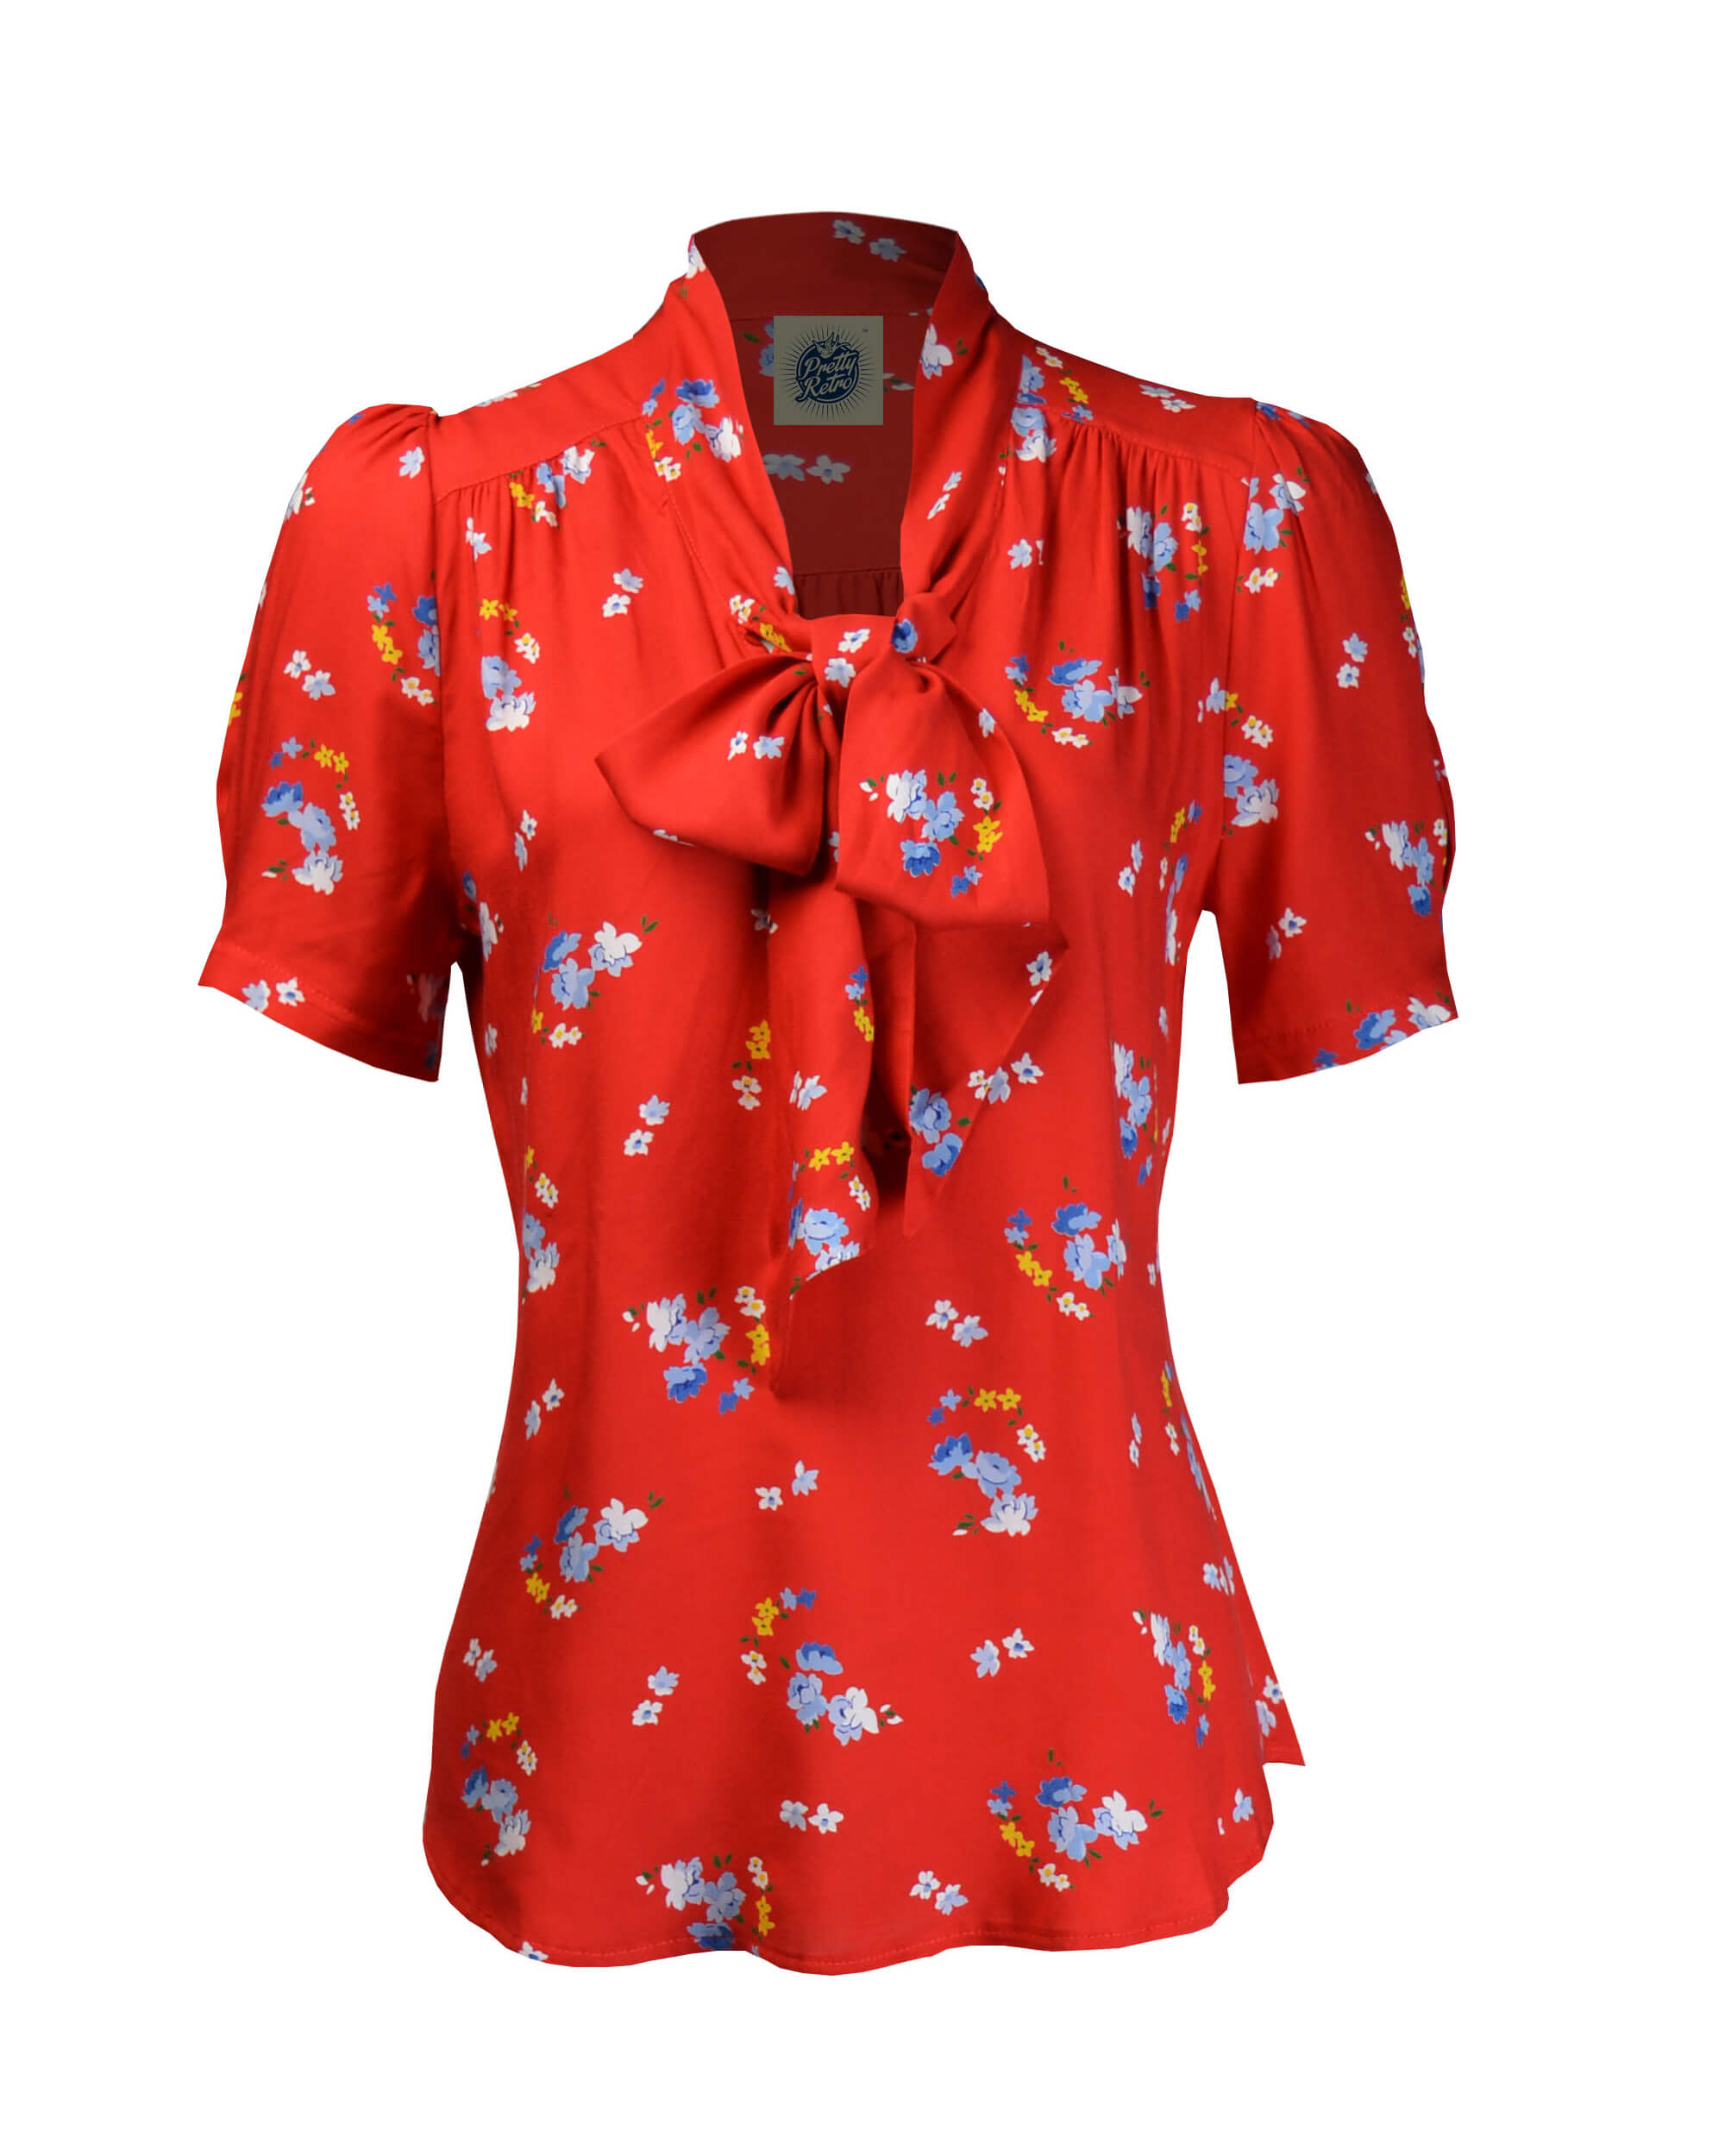 Retro Pussy Bow Blouse - Red Floral